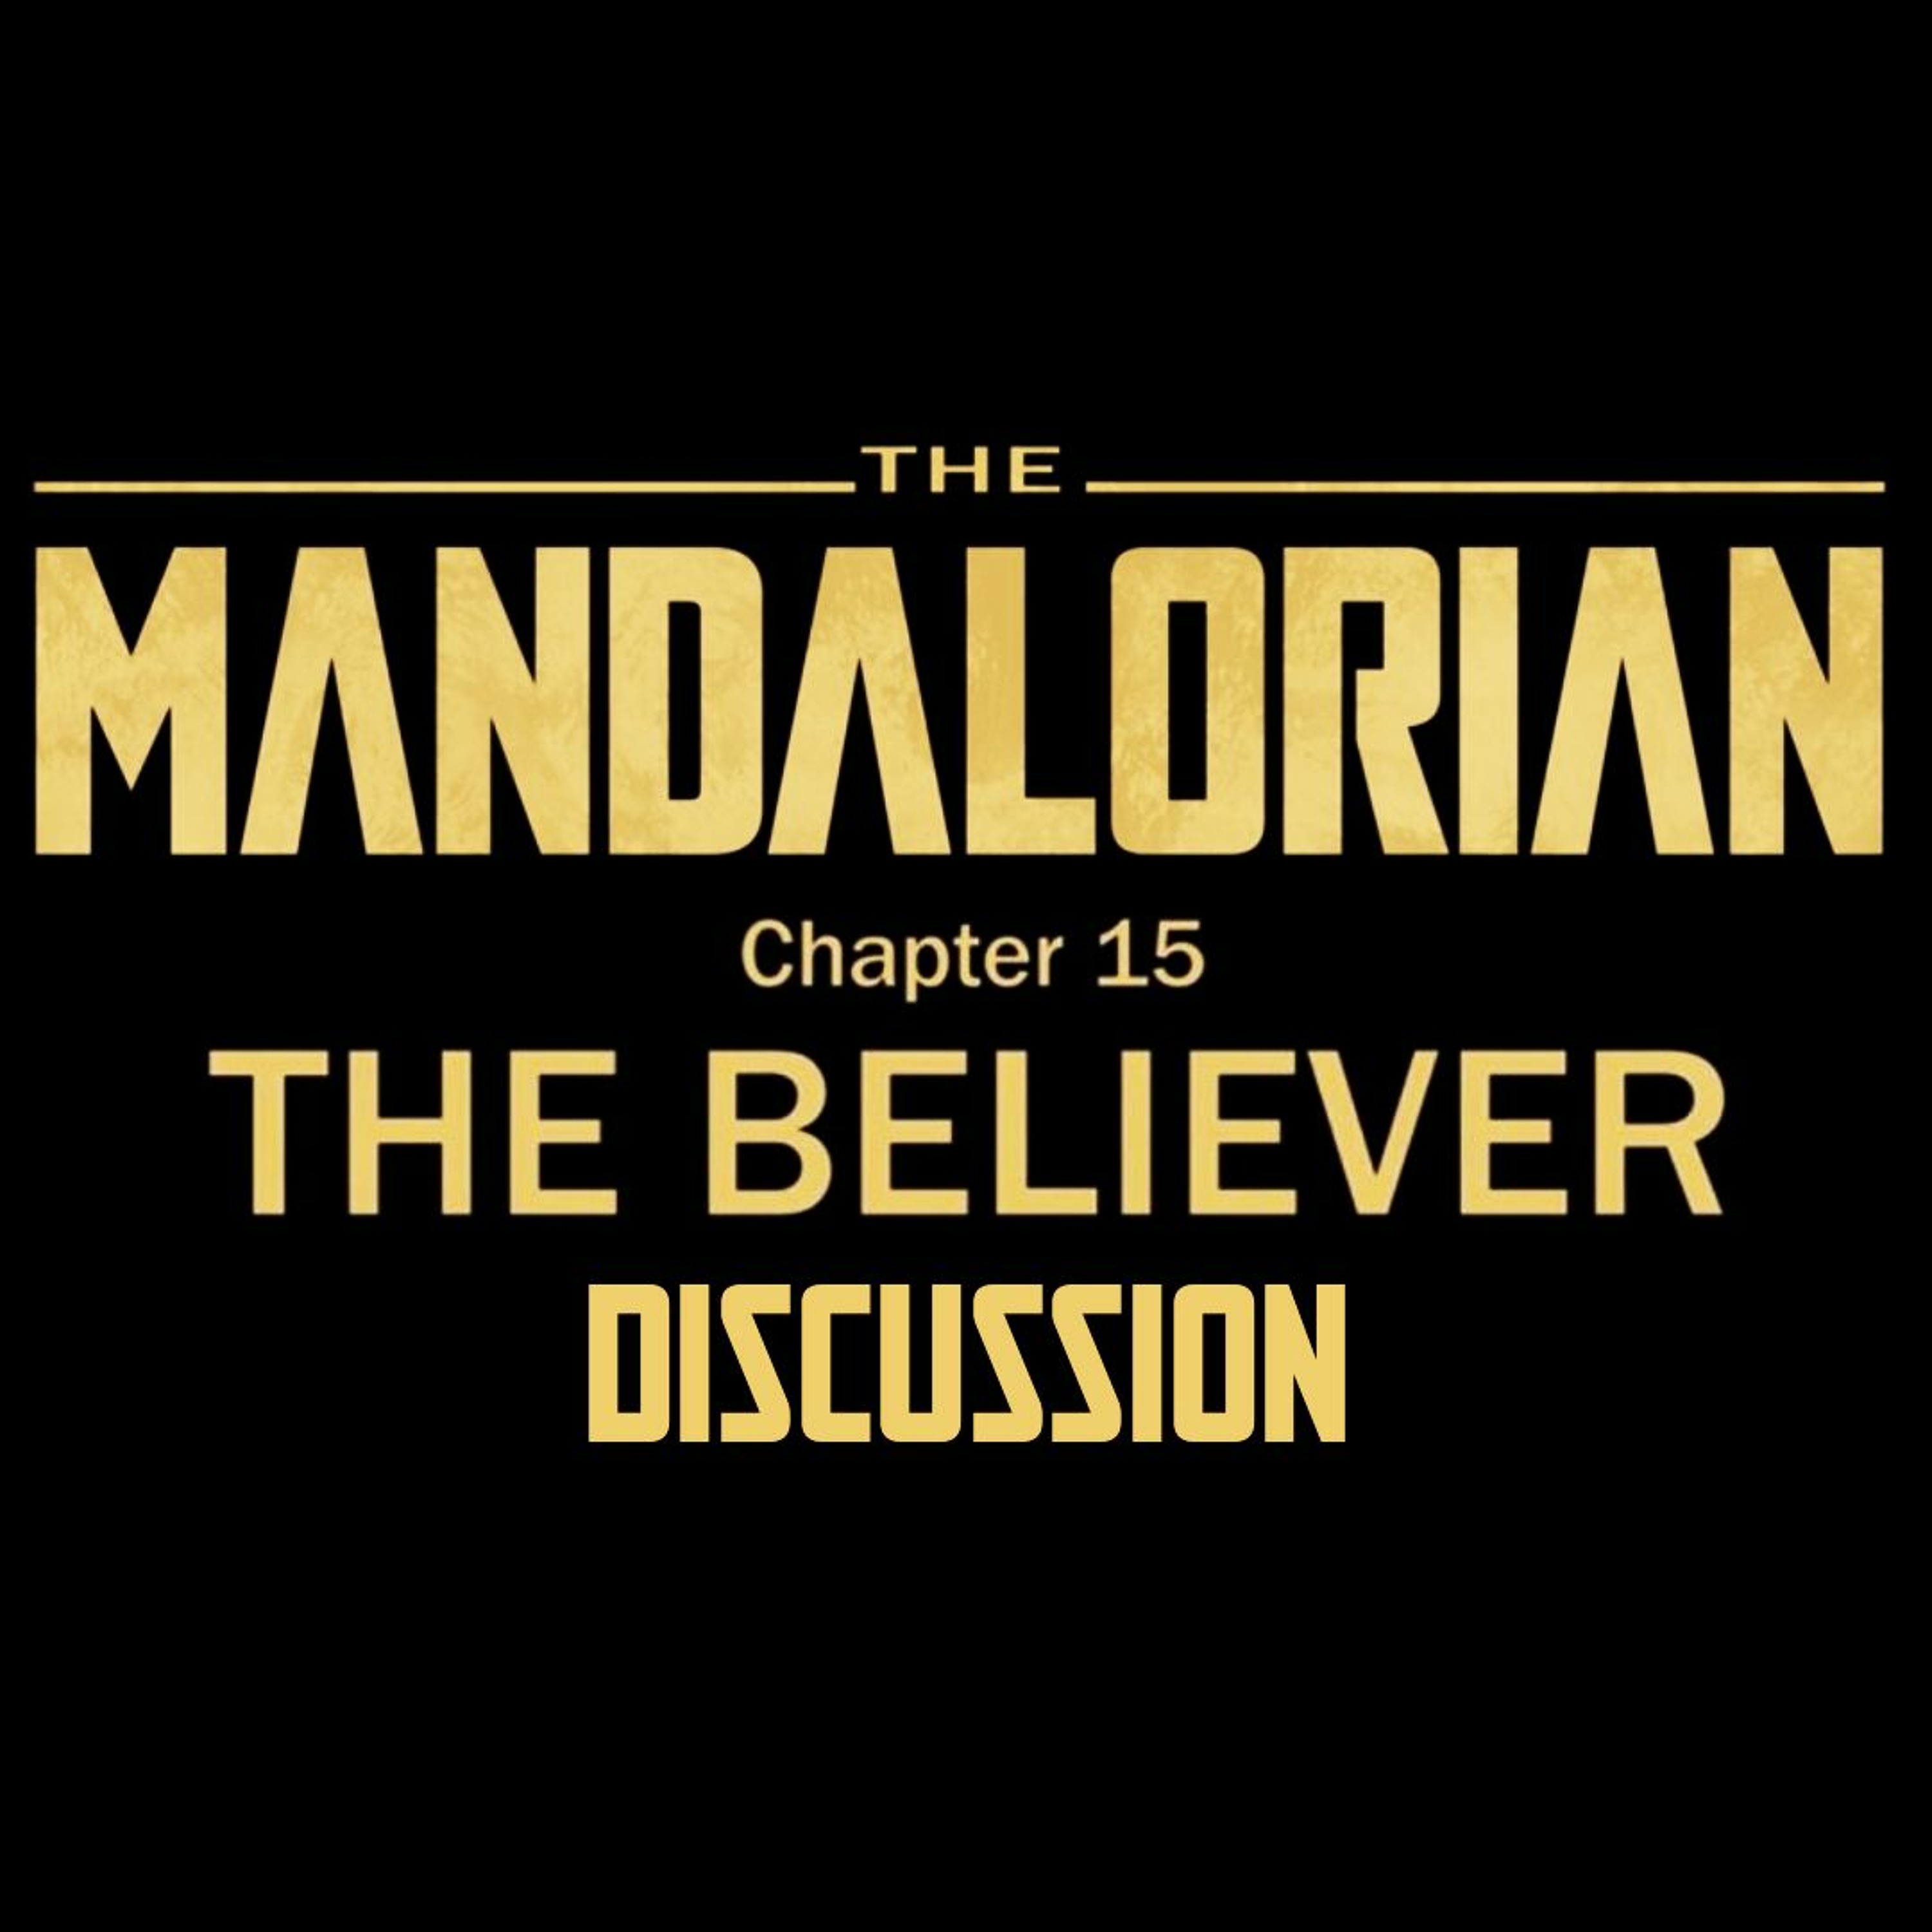 The Mandalorian Chapter 15 - The Believer